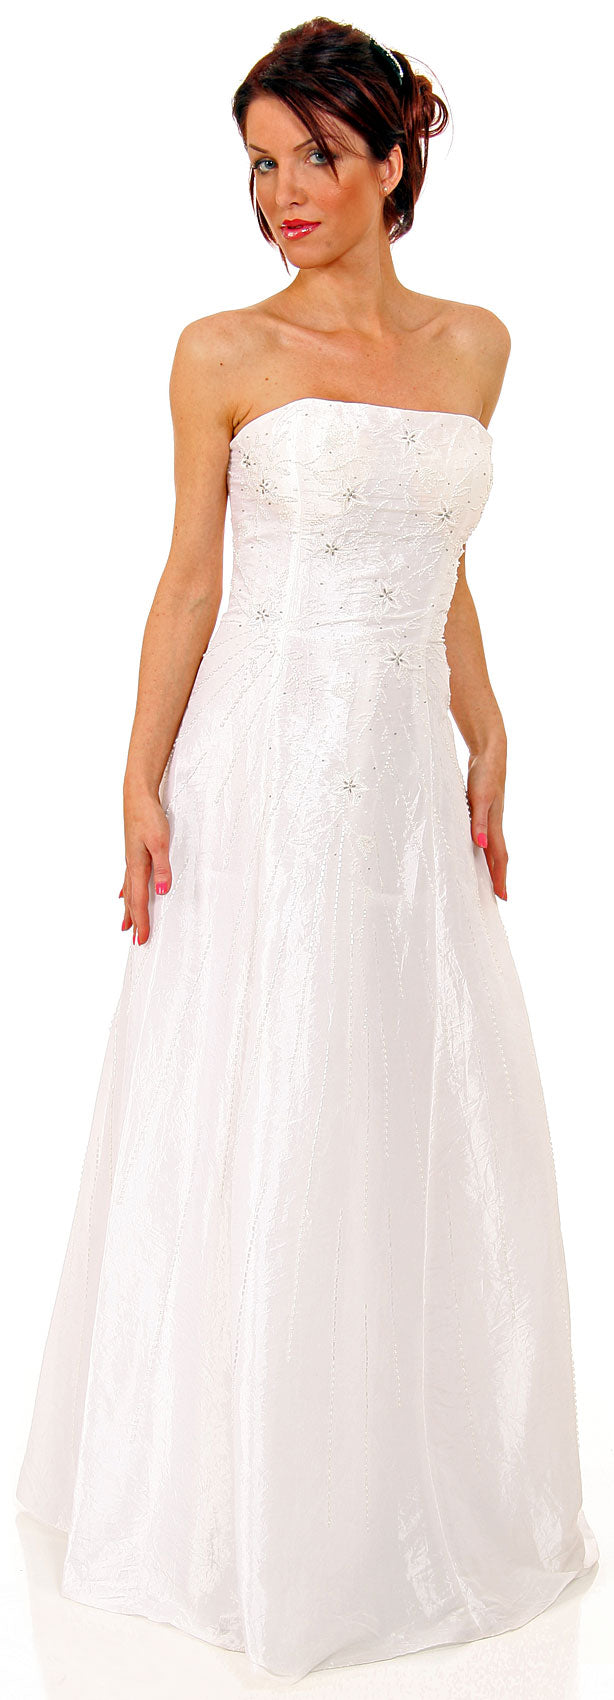 Main image of Criss Crossed Off-shouldered Beaded Prom Dress